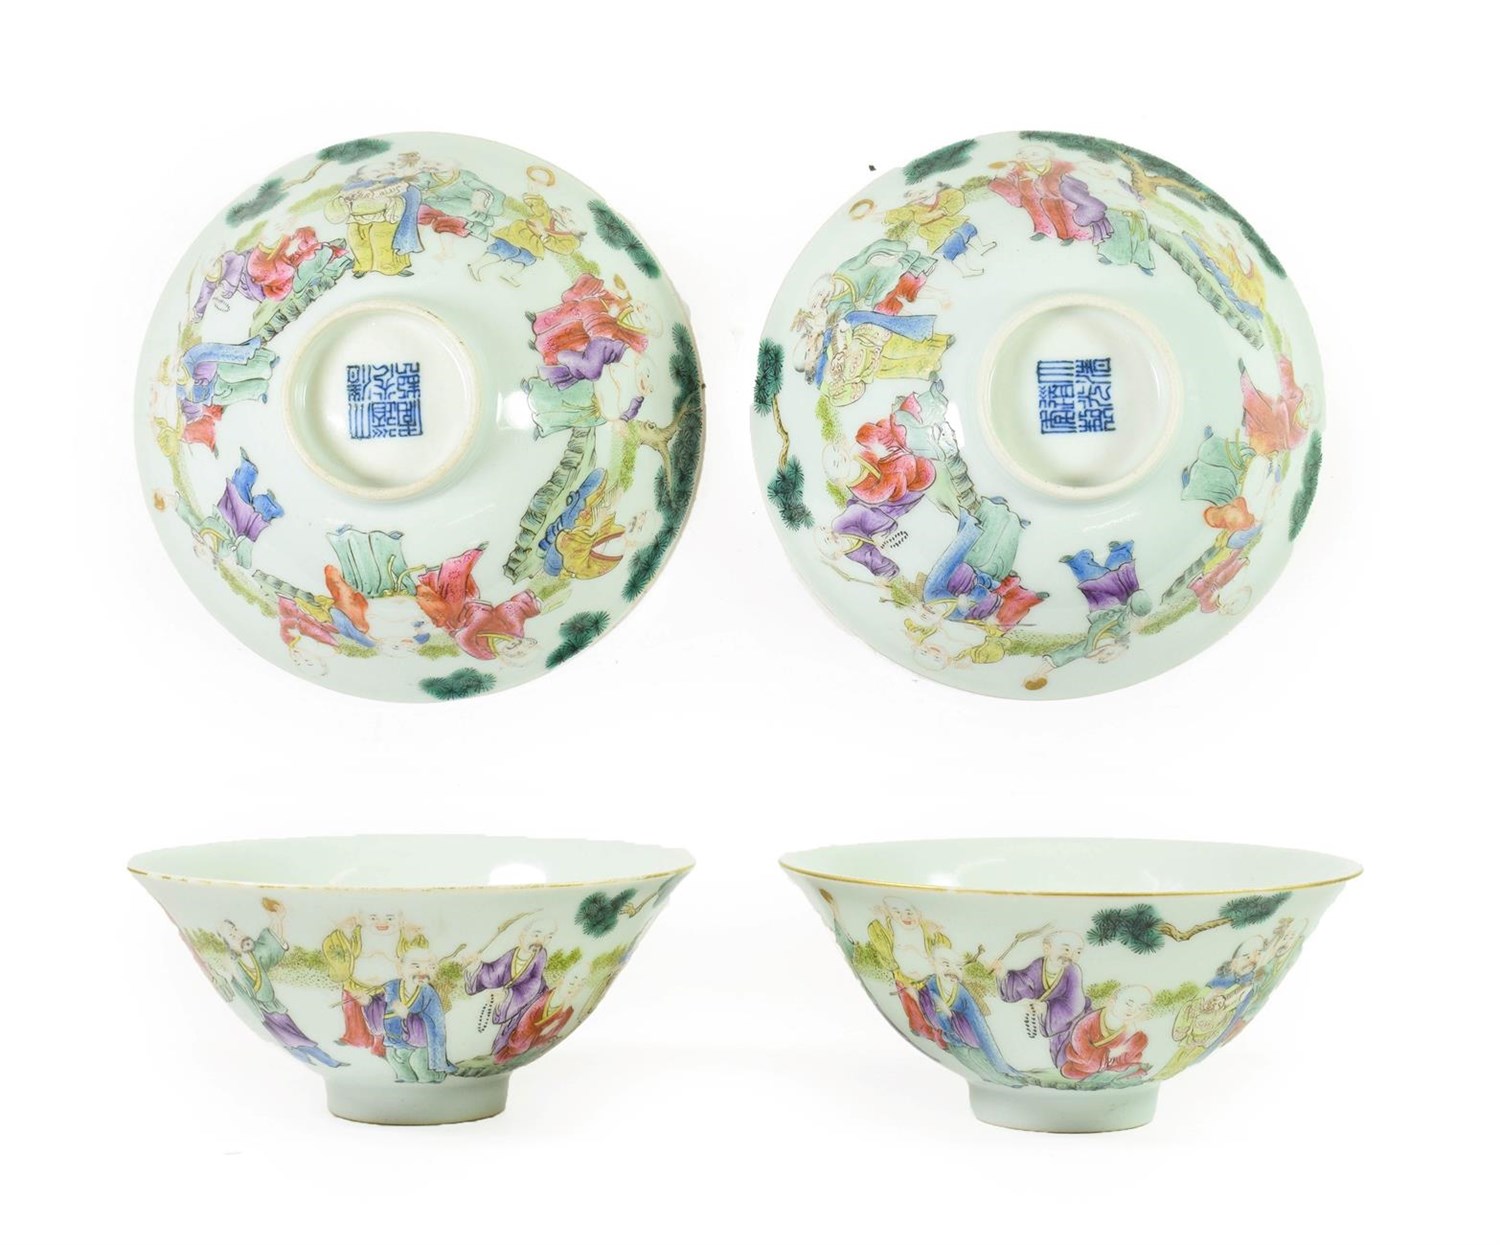 Lot 82 - A Pair of Chinese Porcelain Rice Bowls, Daoguang reign marks and possibly of the period, painted in